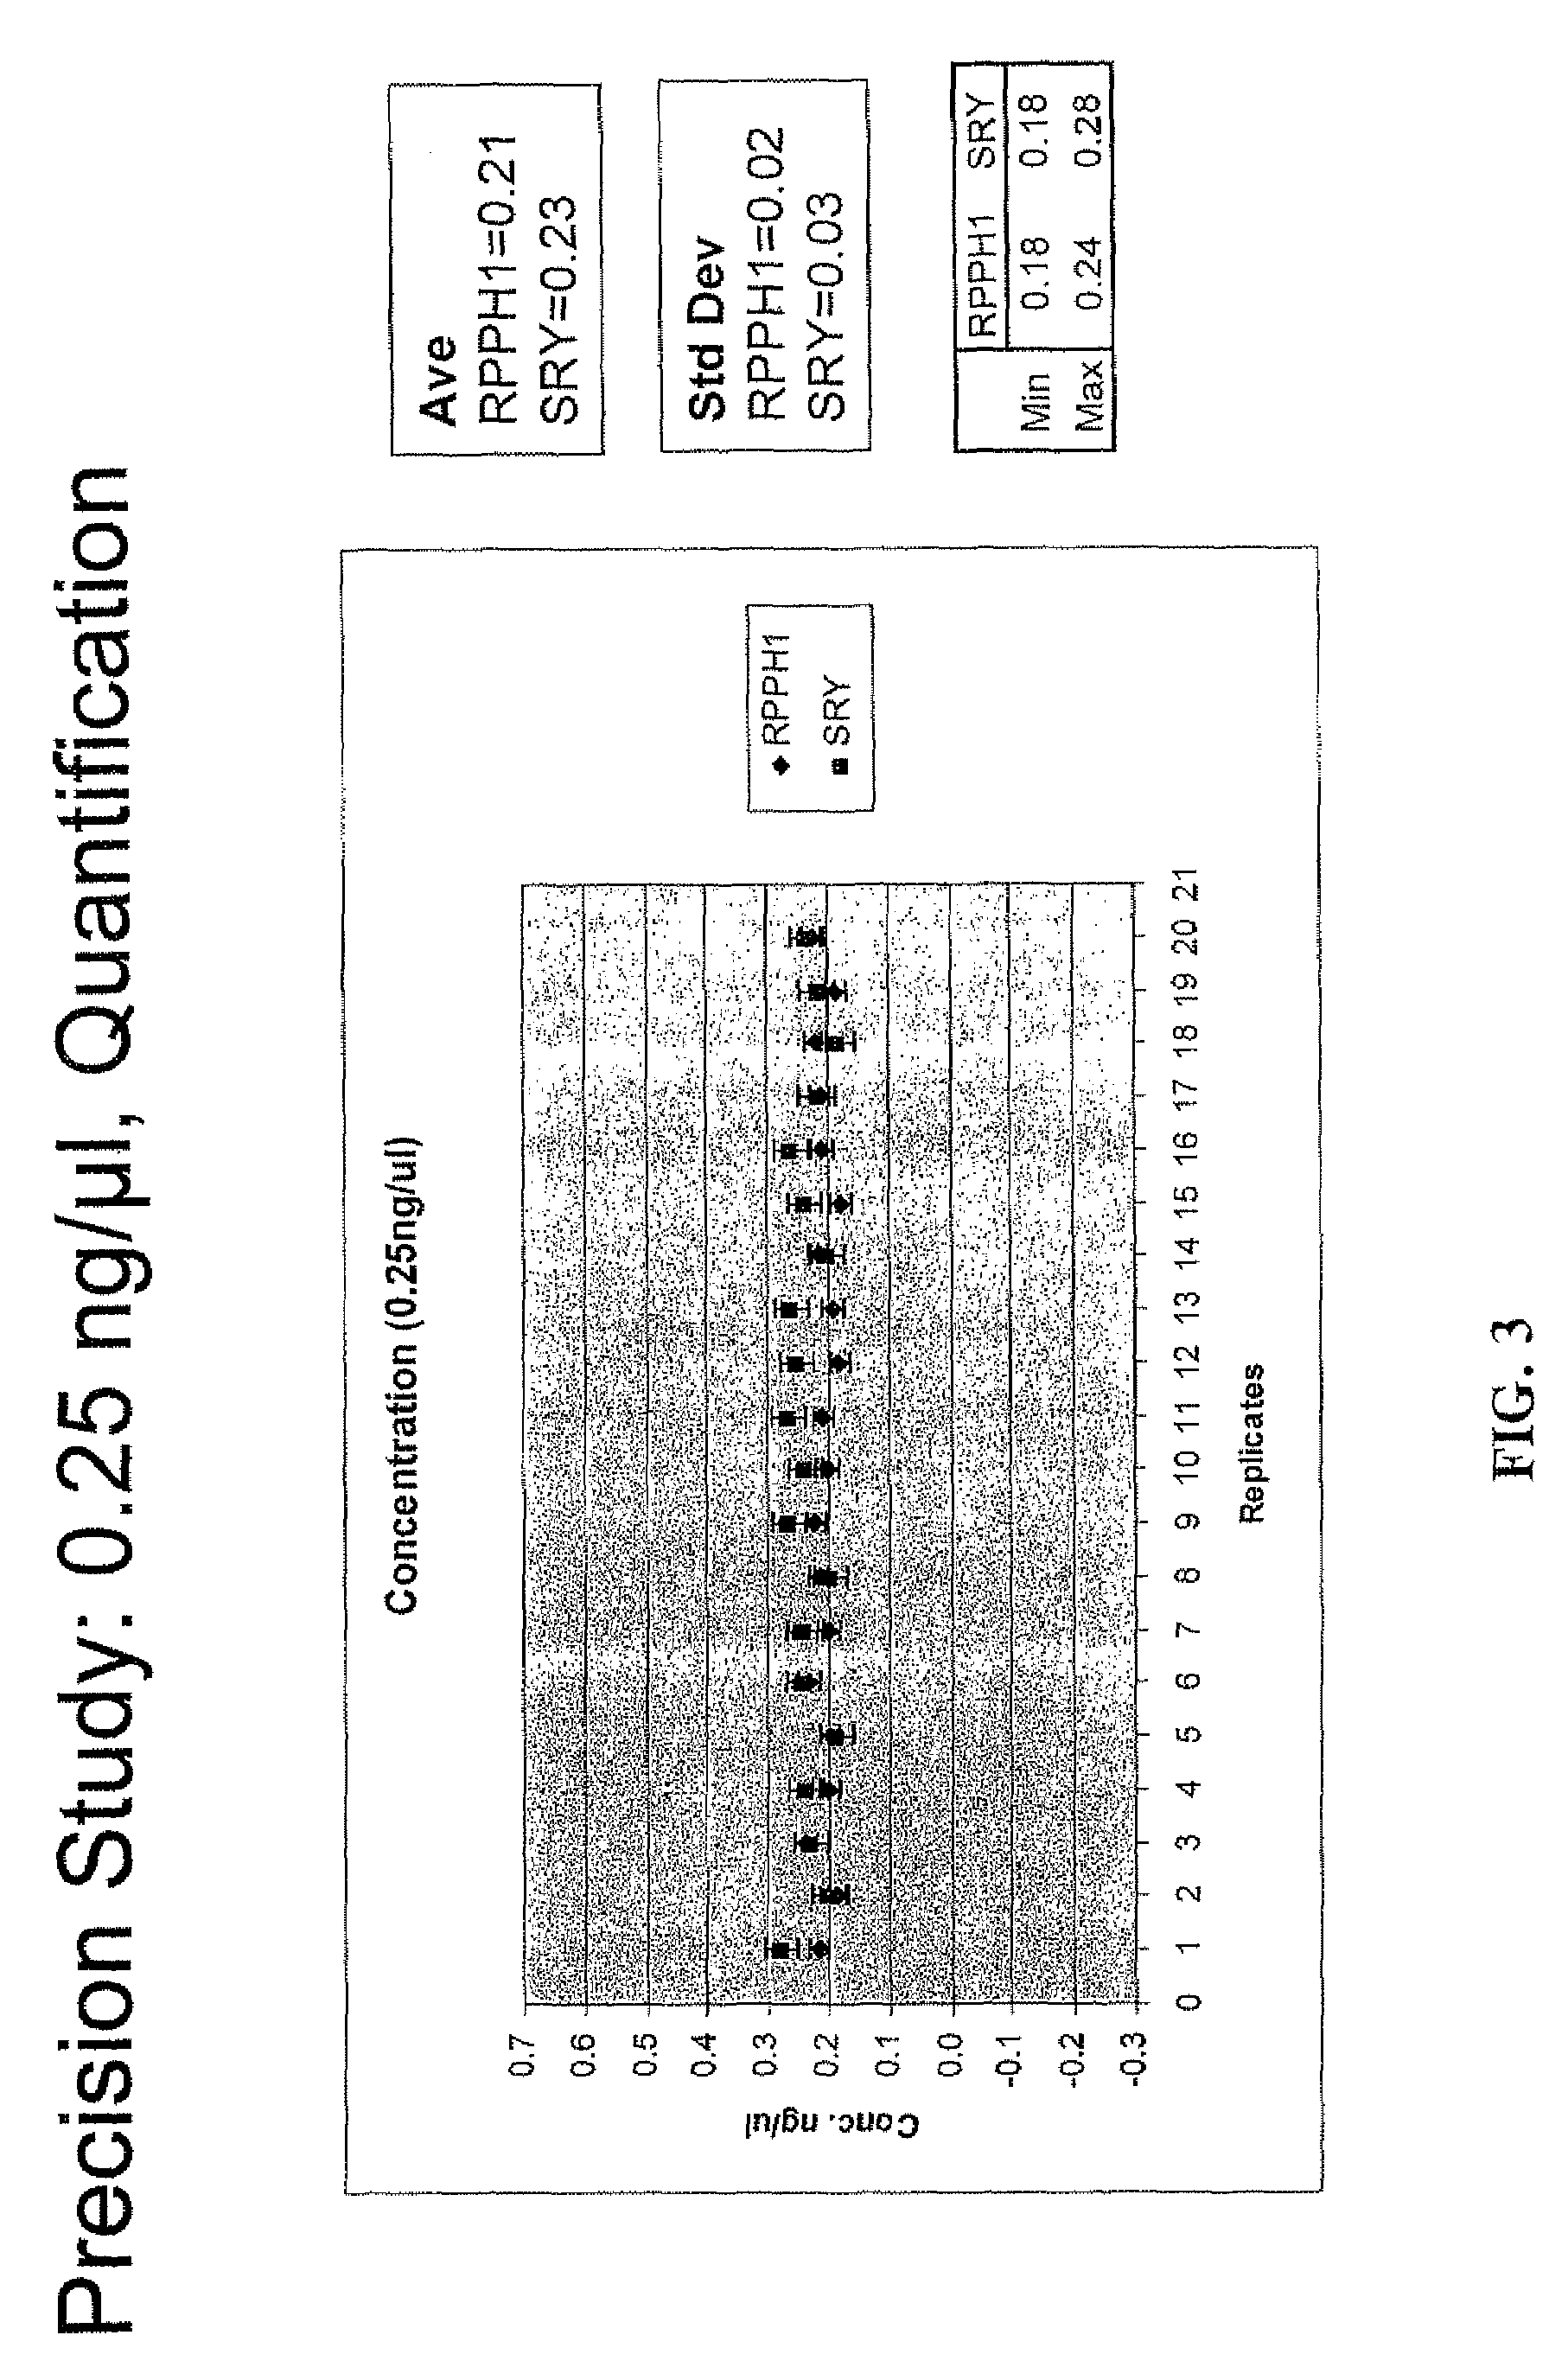 Multiplex compositions and methods for quantification of human nuclear DNA and human male DNA and detection of PCR inhibitors